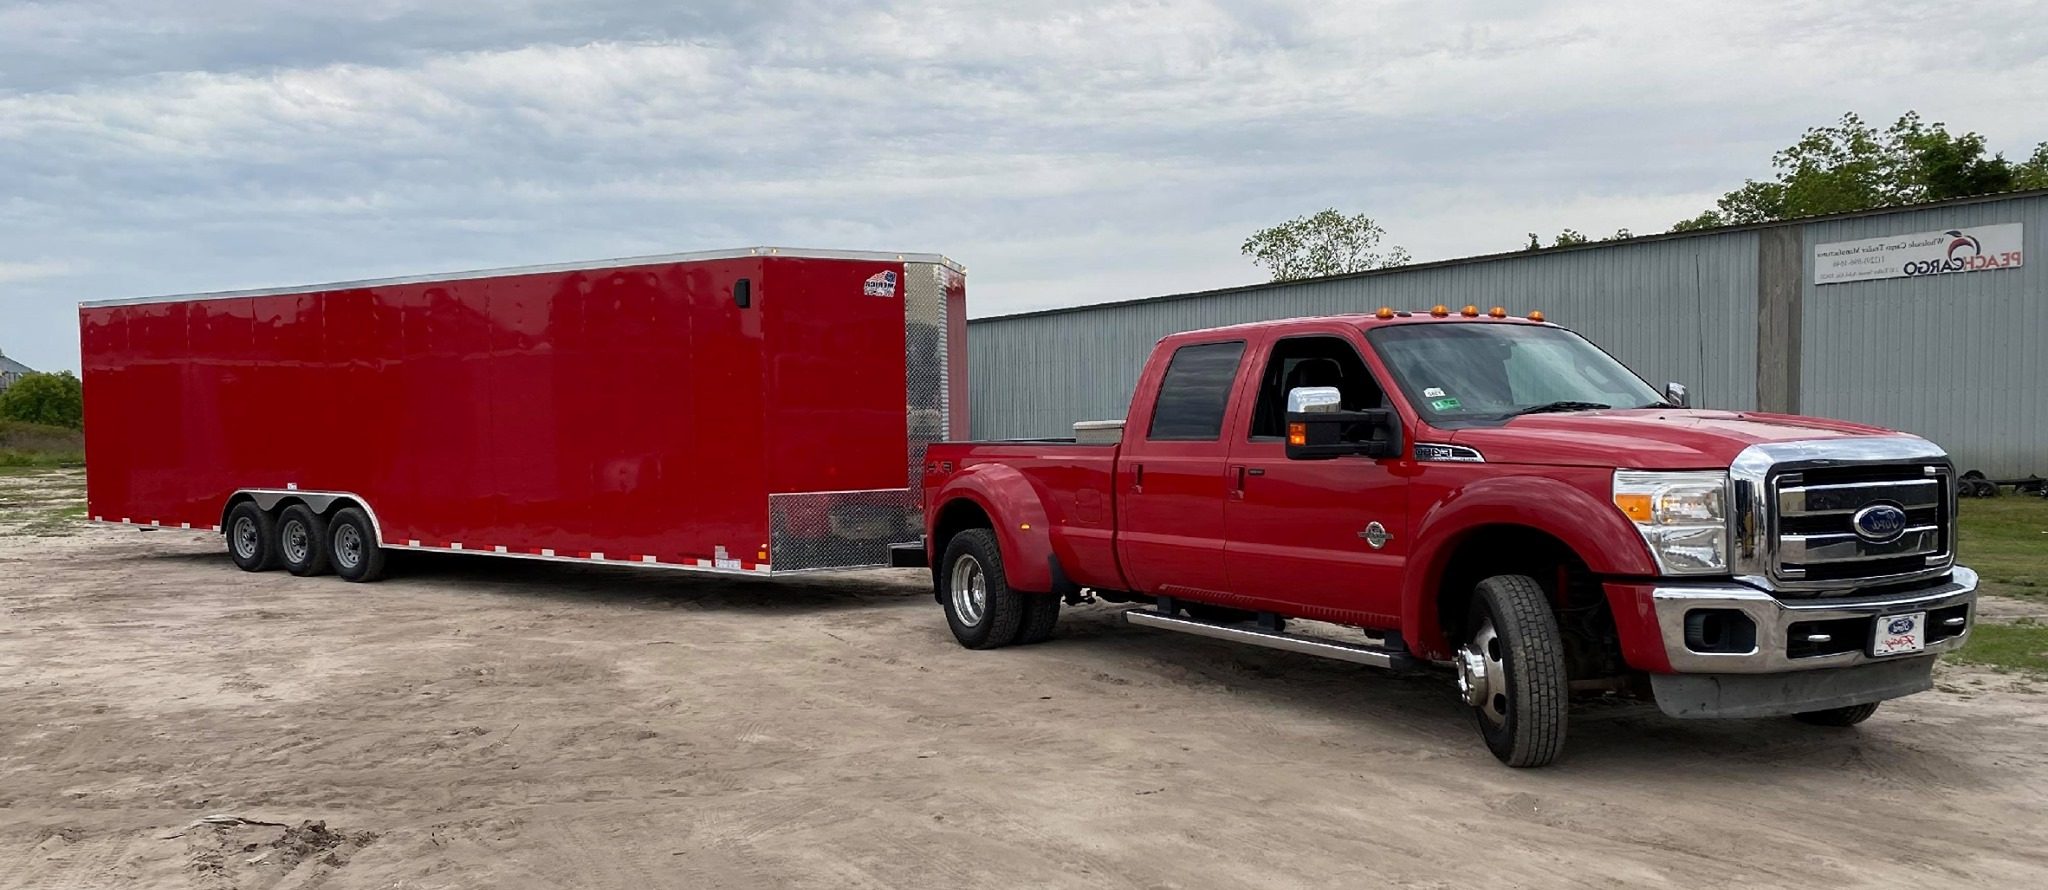 Long red enclosed trailer pulled by a red Pickup